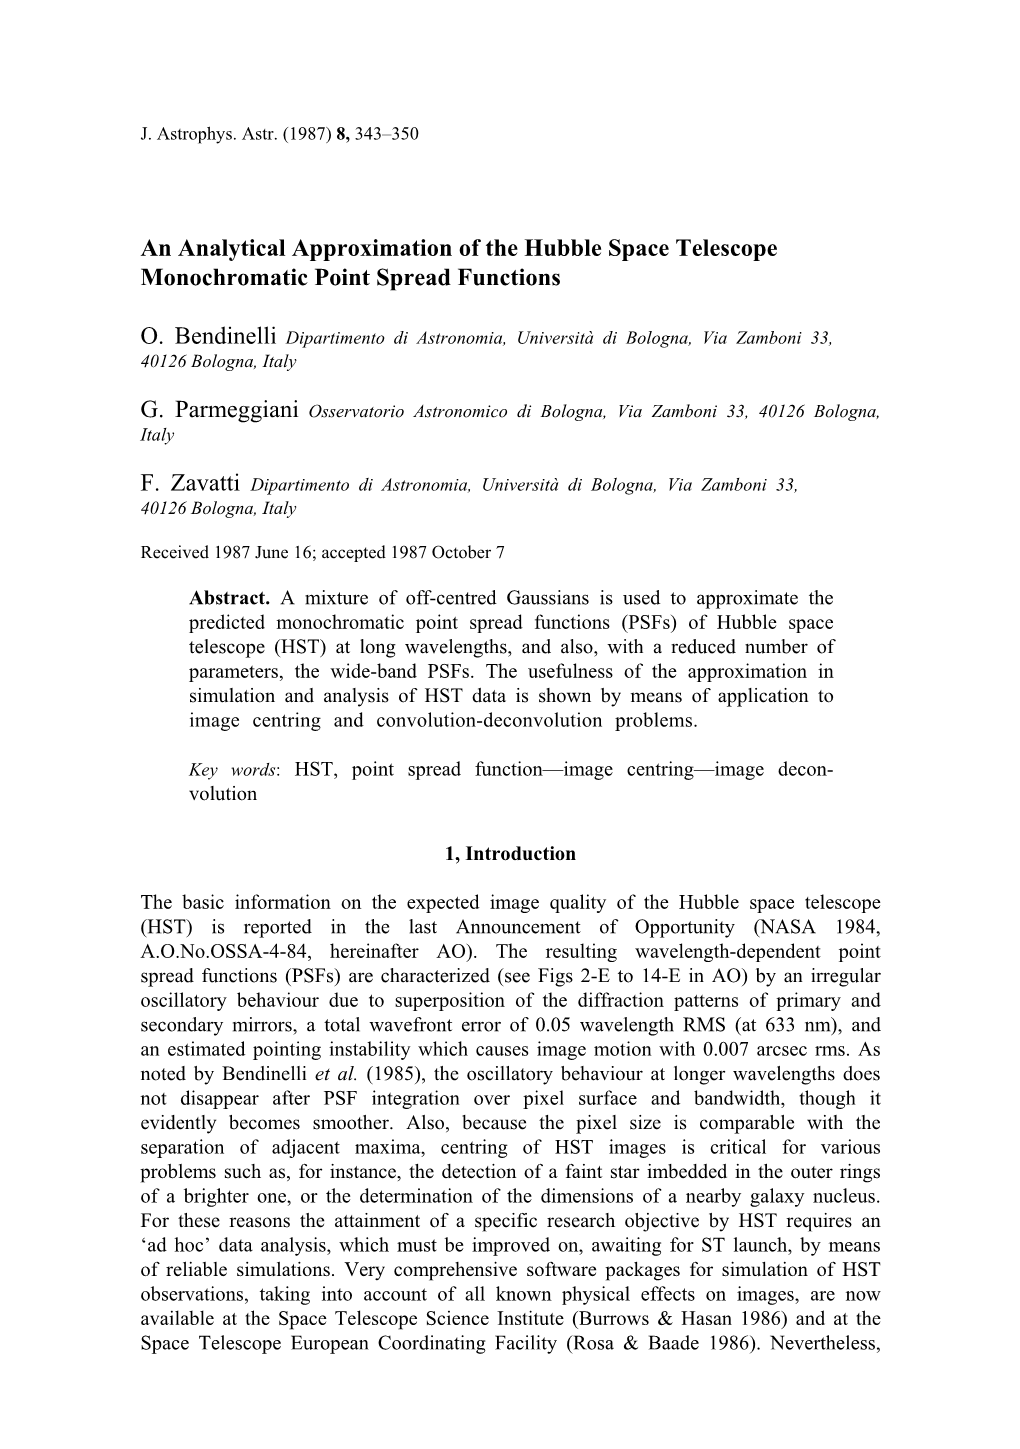 An Analytical Approximation of the Hubble Space Telescope Monochromatic Point Spread Functions